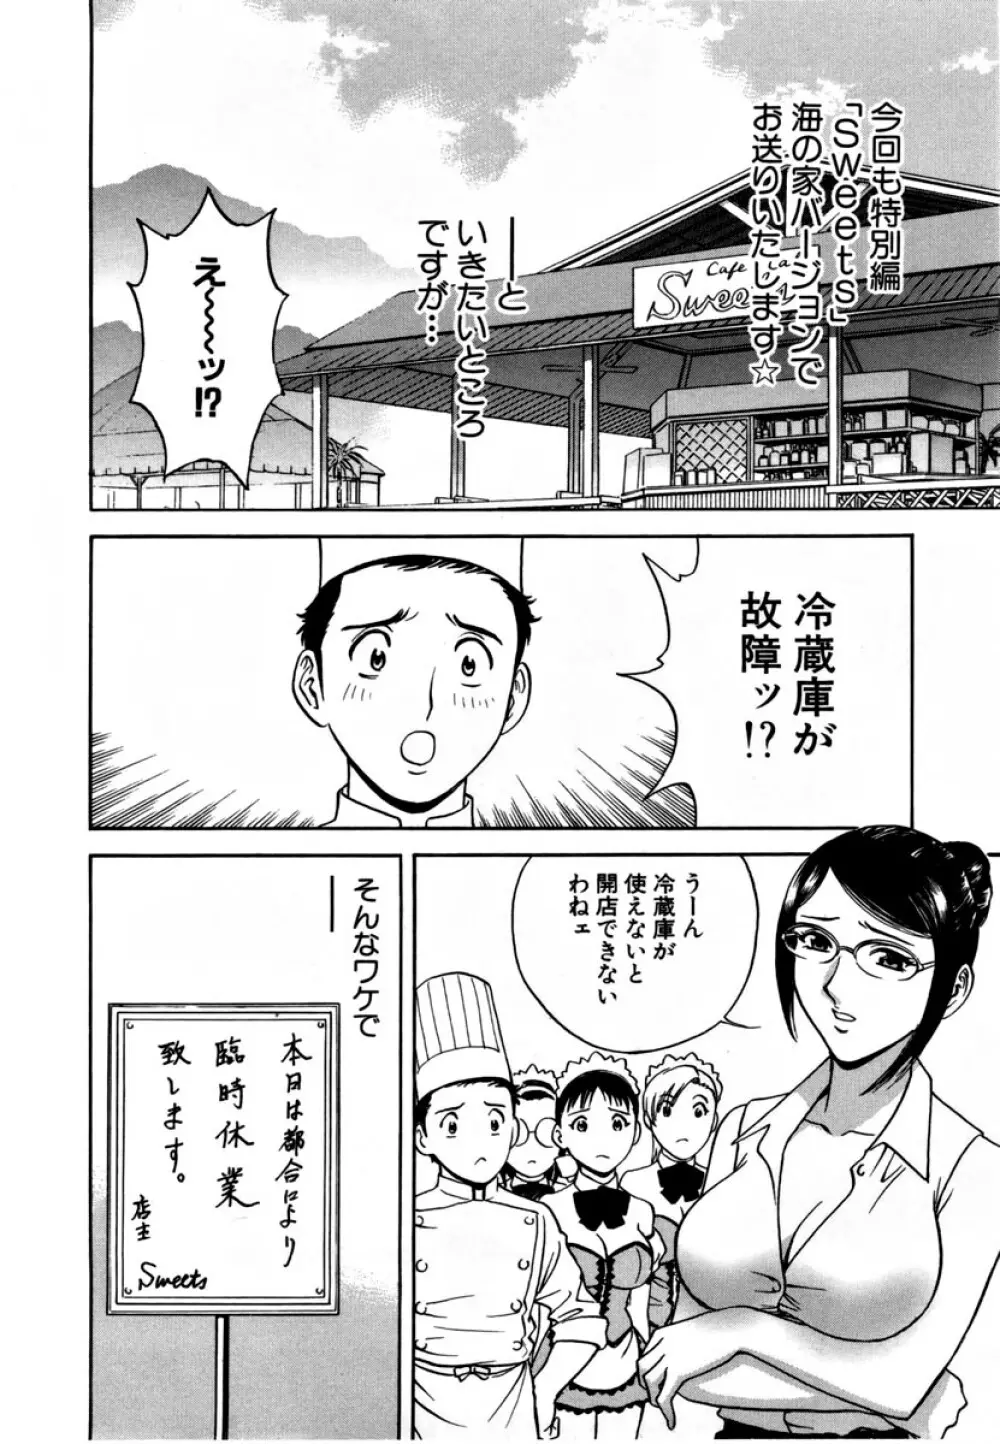 Sweets - 甘い果実 01 Page.131